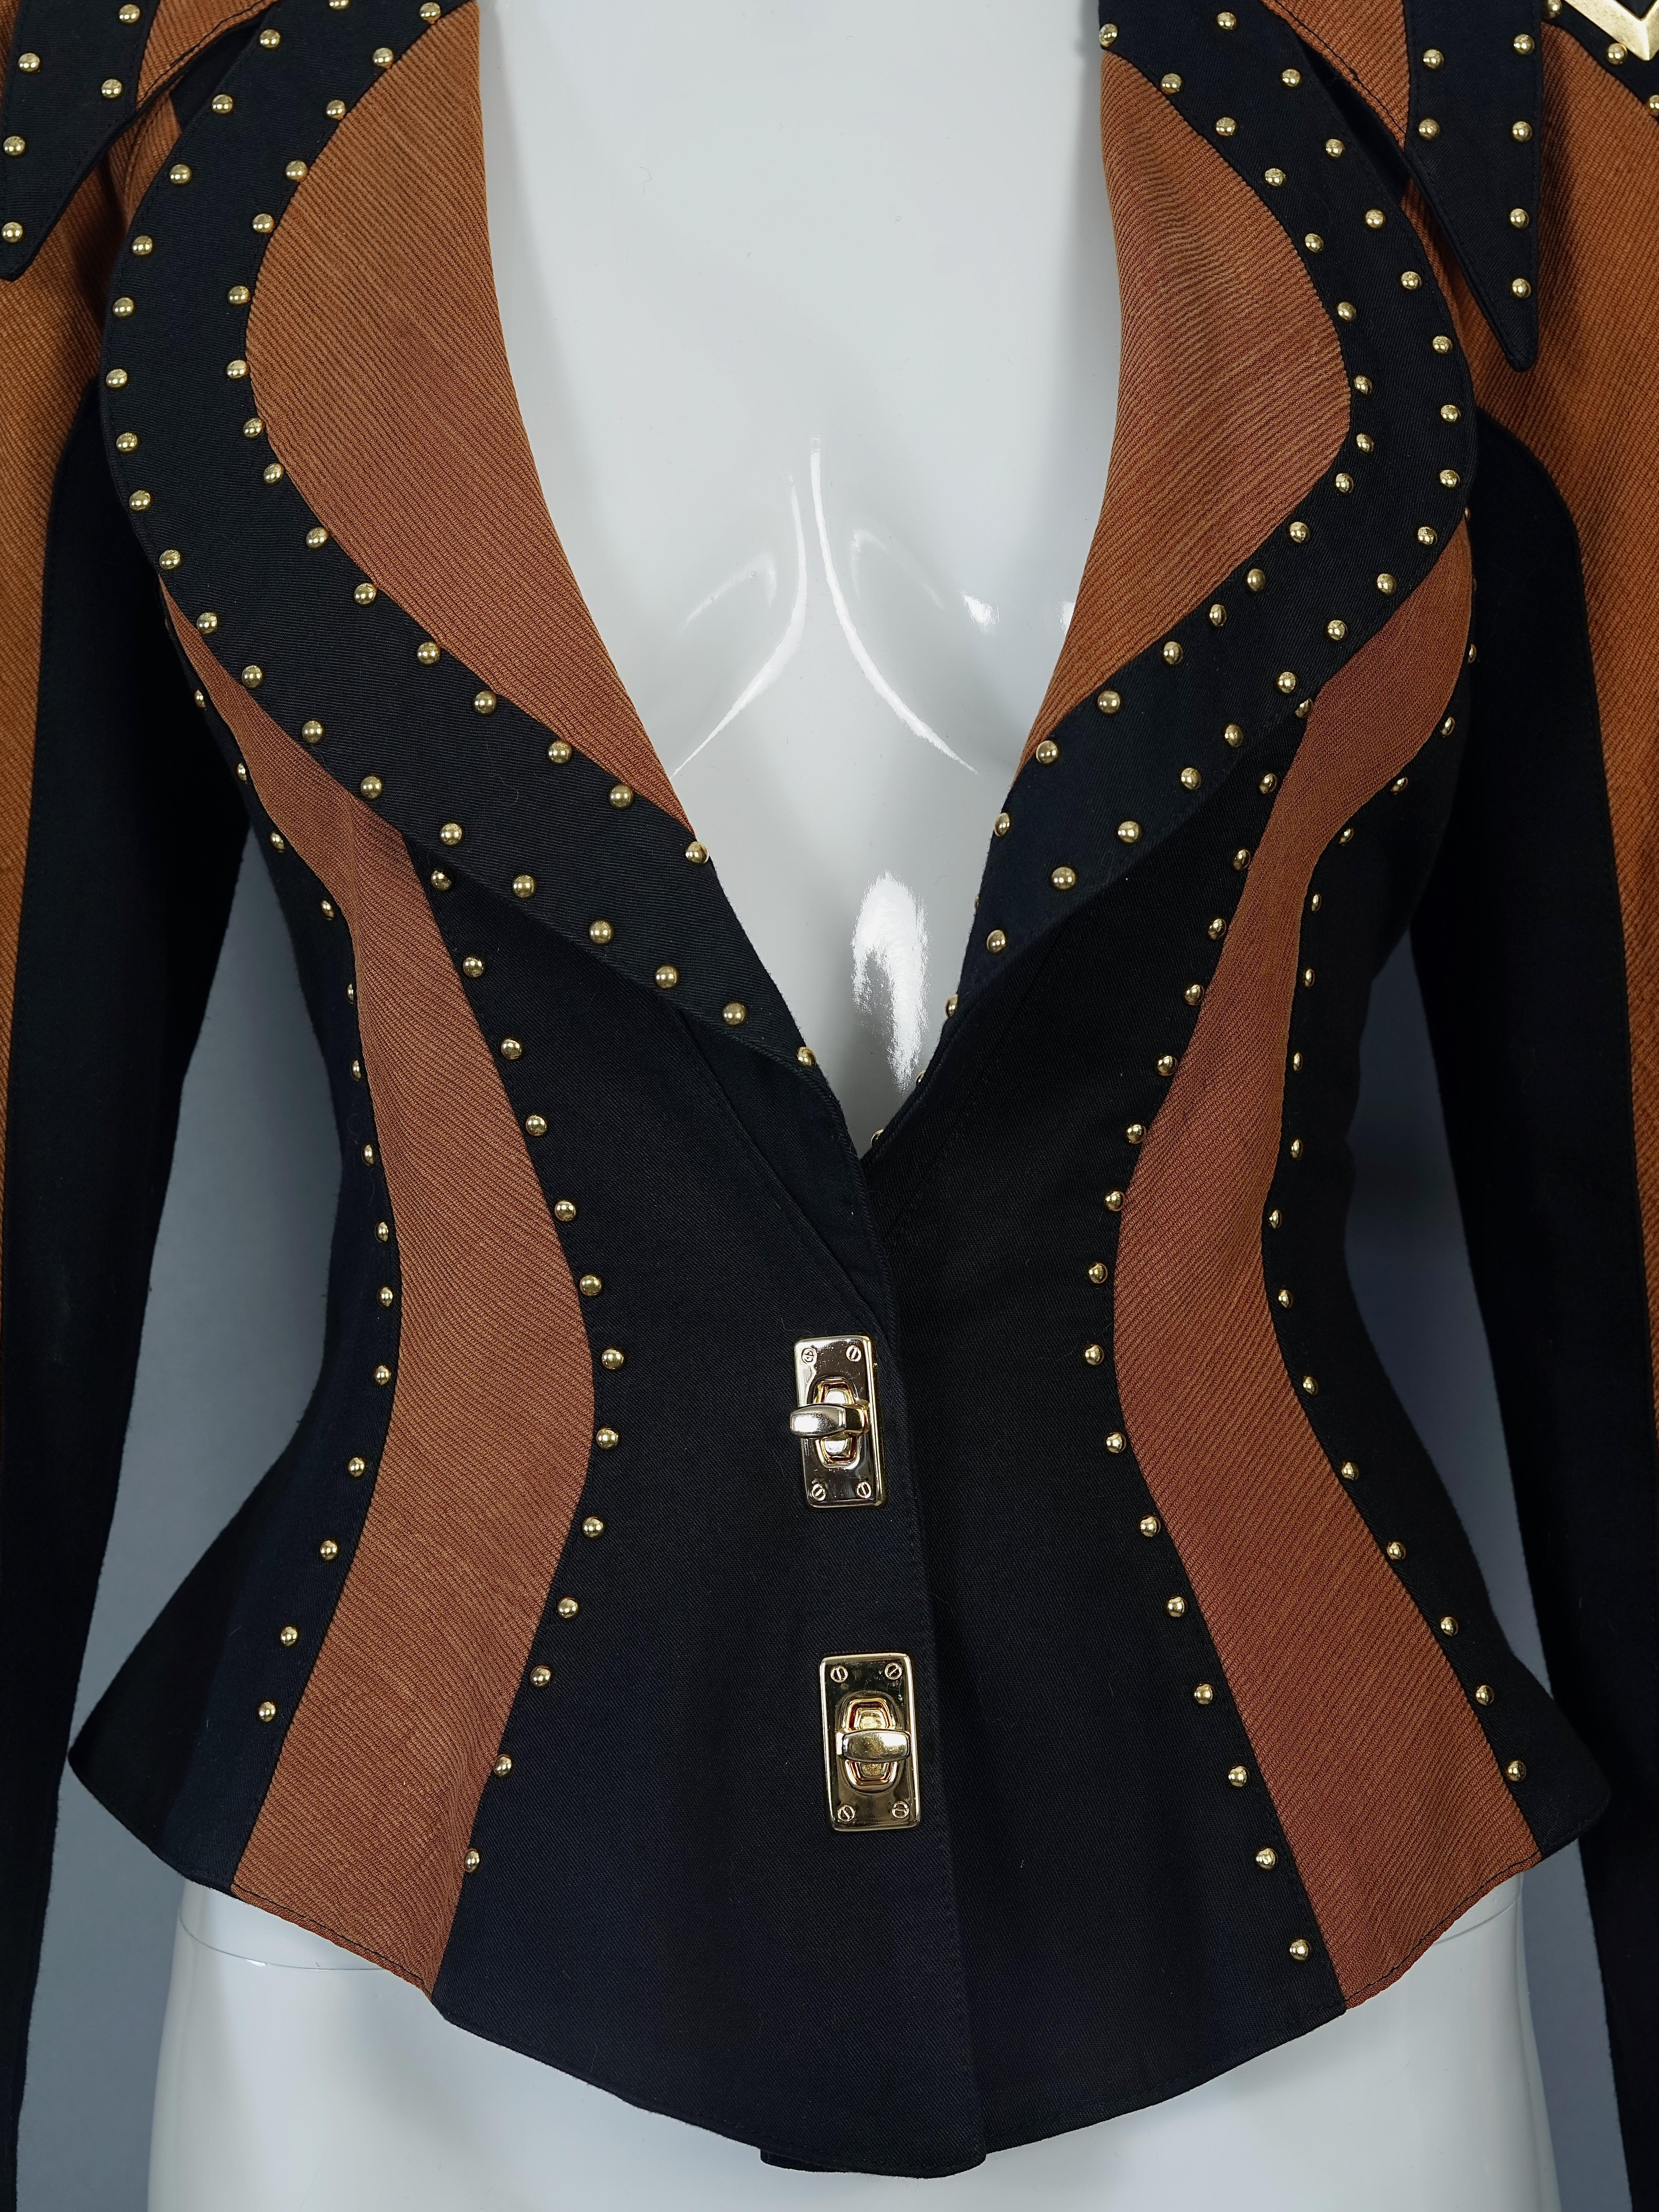 Black Vintage CHRISTIAN LACROIX Studs and Jeweled Buttons Contrast Jacket